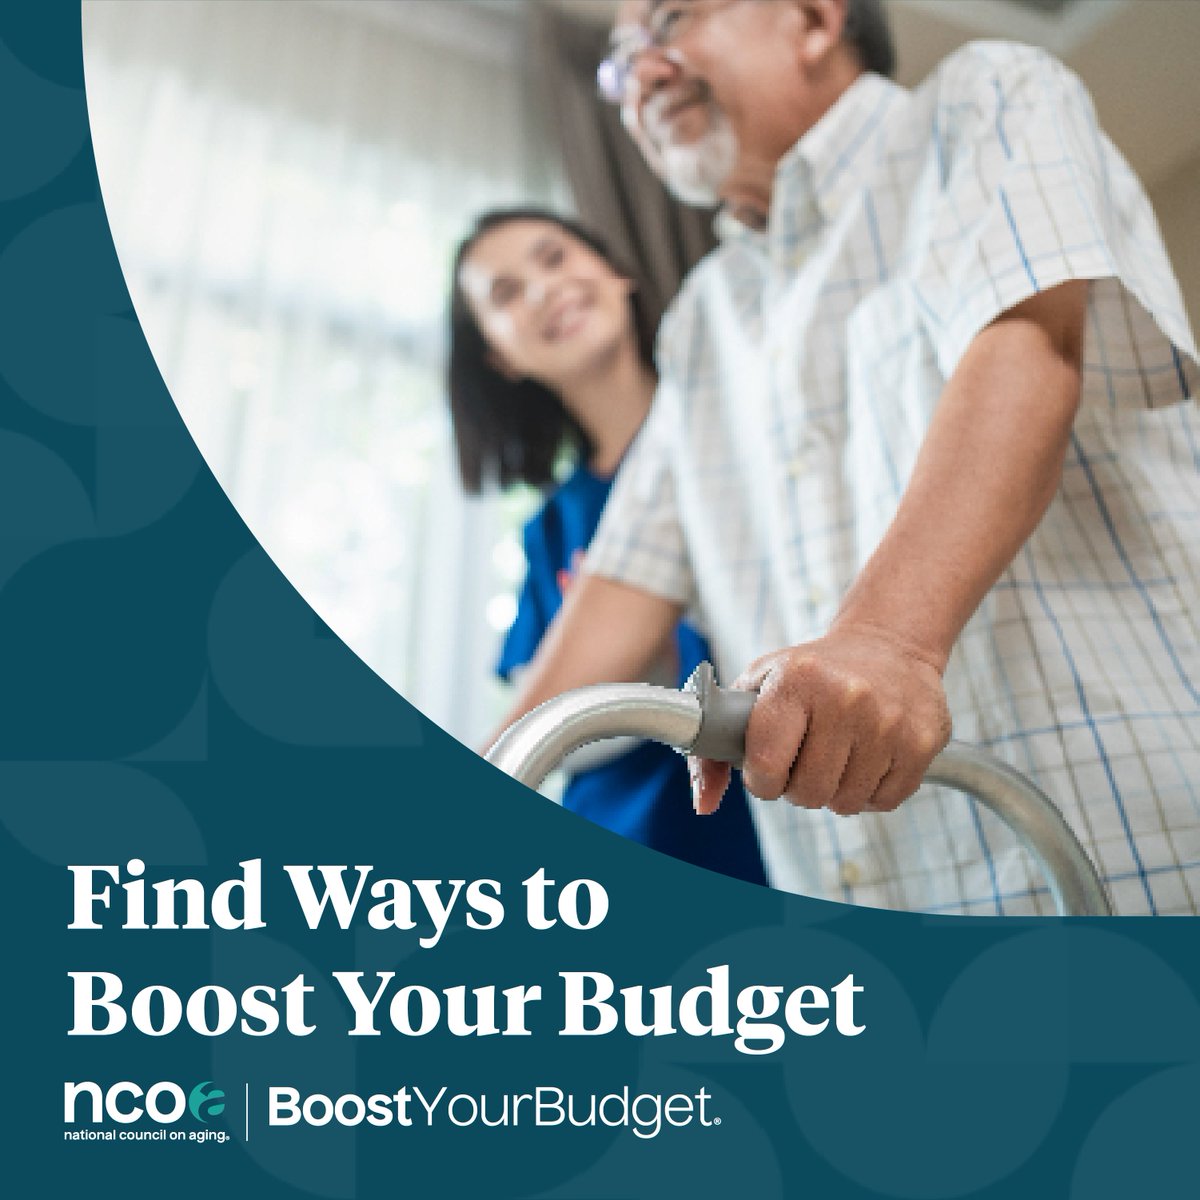 Making ends meet on a fixed income isn't easy - and #Inflation made it more complicated. Look for food, #medicine, utilities, or transportation #benefits programs with the free BenefitsCheckUp® tool: ncoa.org/Boost
#BoostYourBudgetWeek